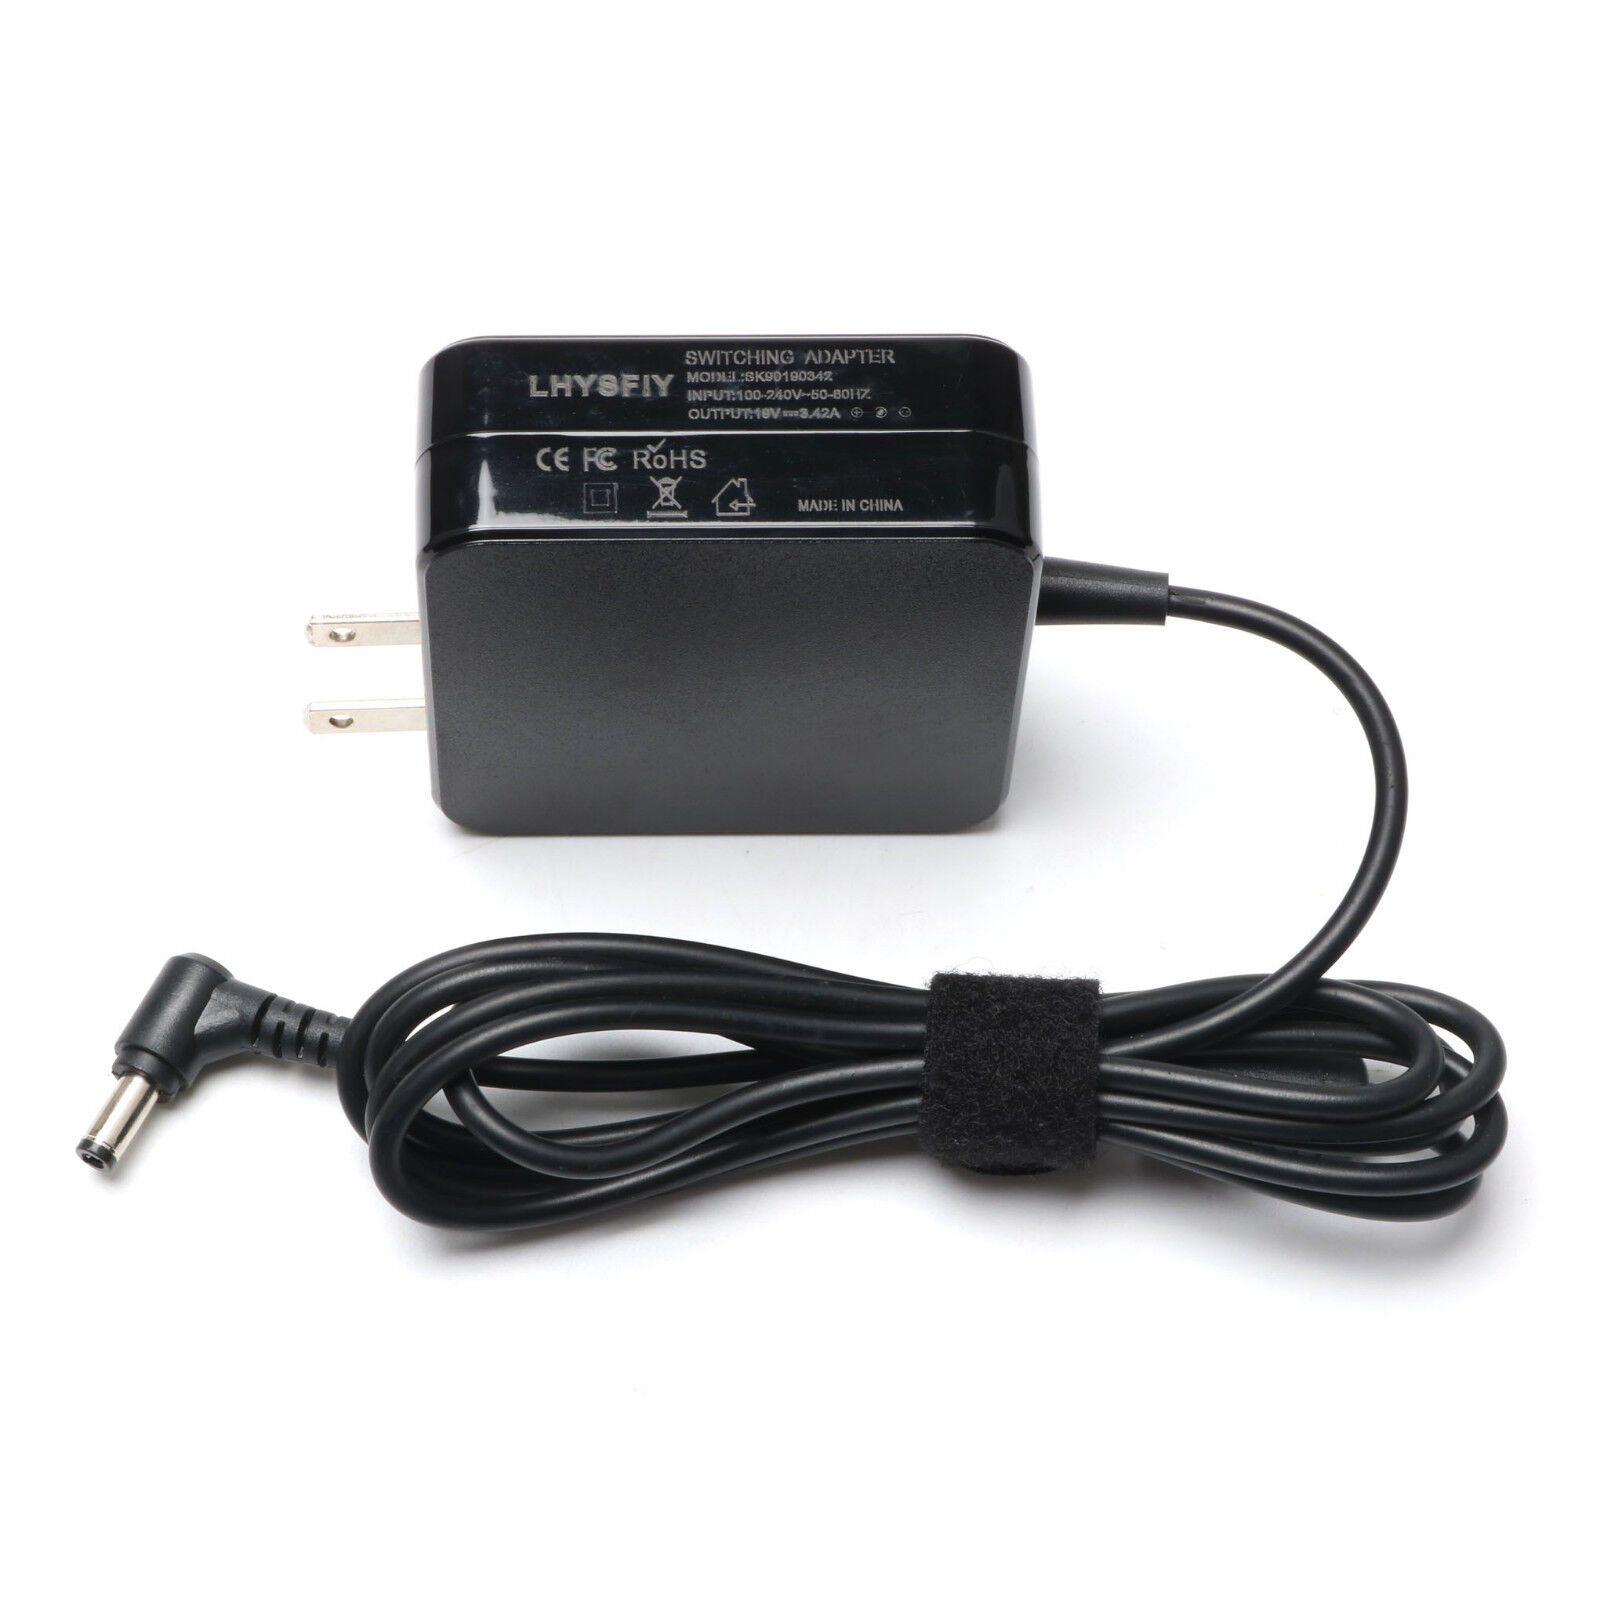 19V Power Adapter for Asus Router RT-AC88U AC3100 RT-AC87U RT-AC87R RT-AC5300